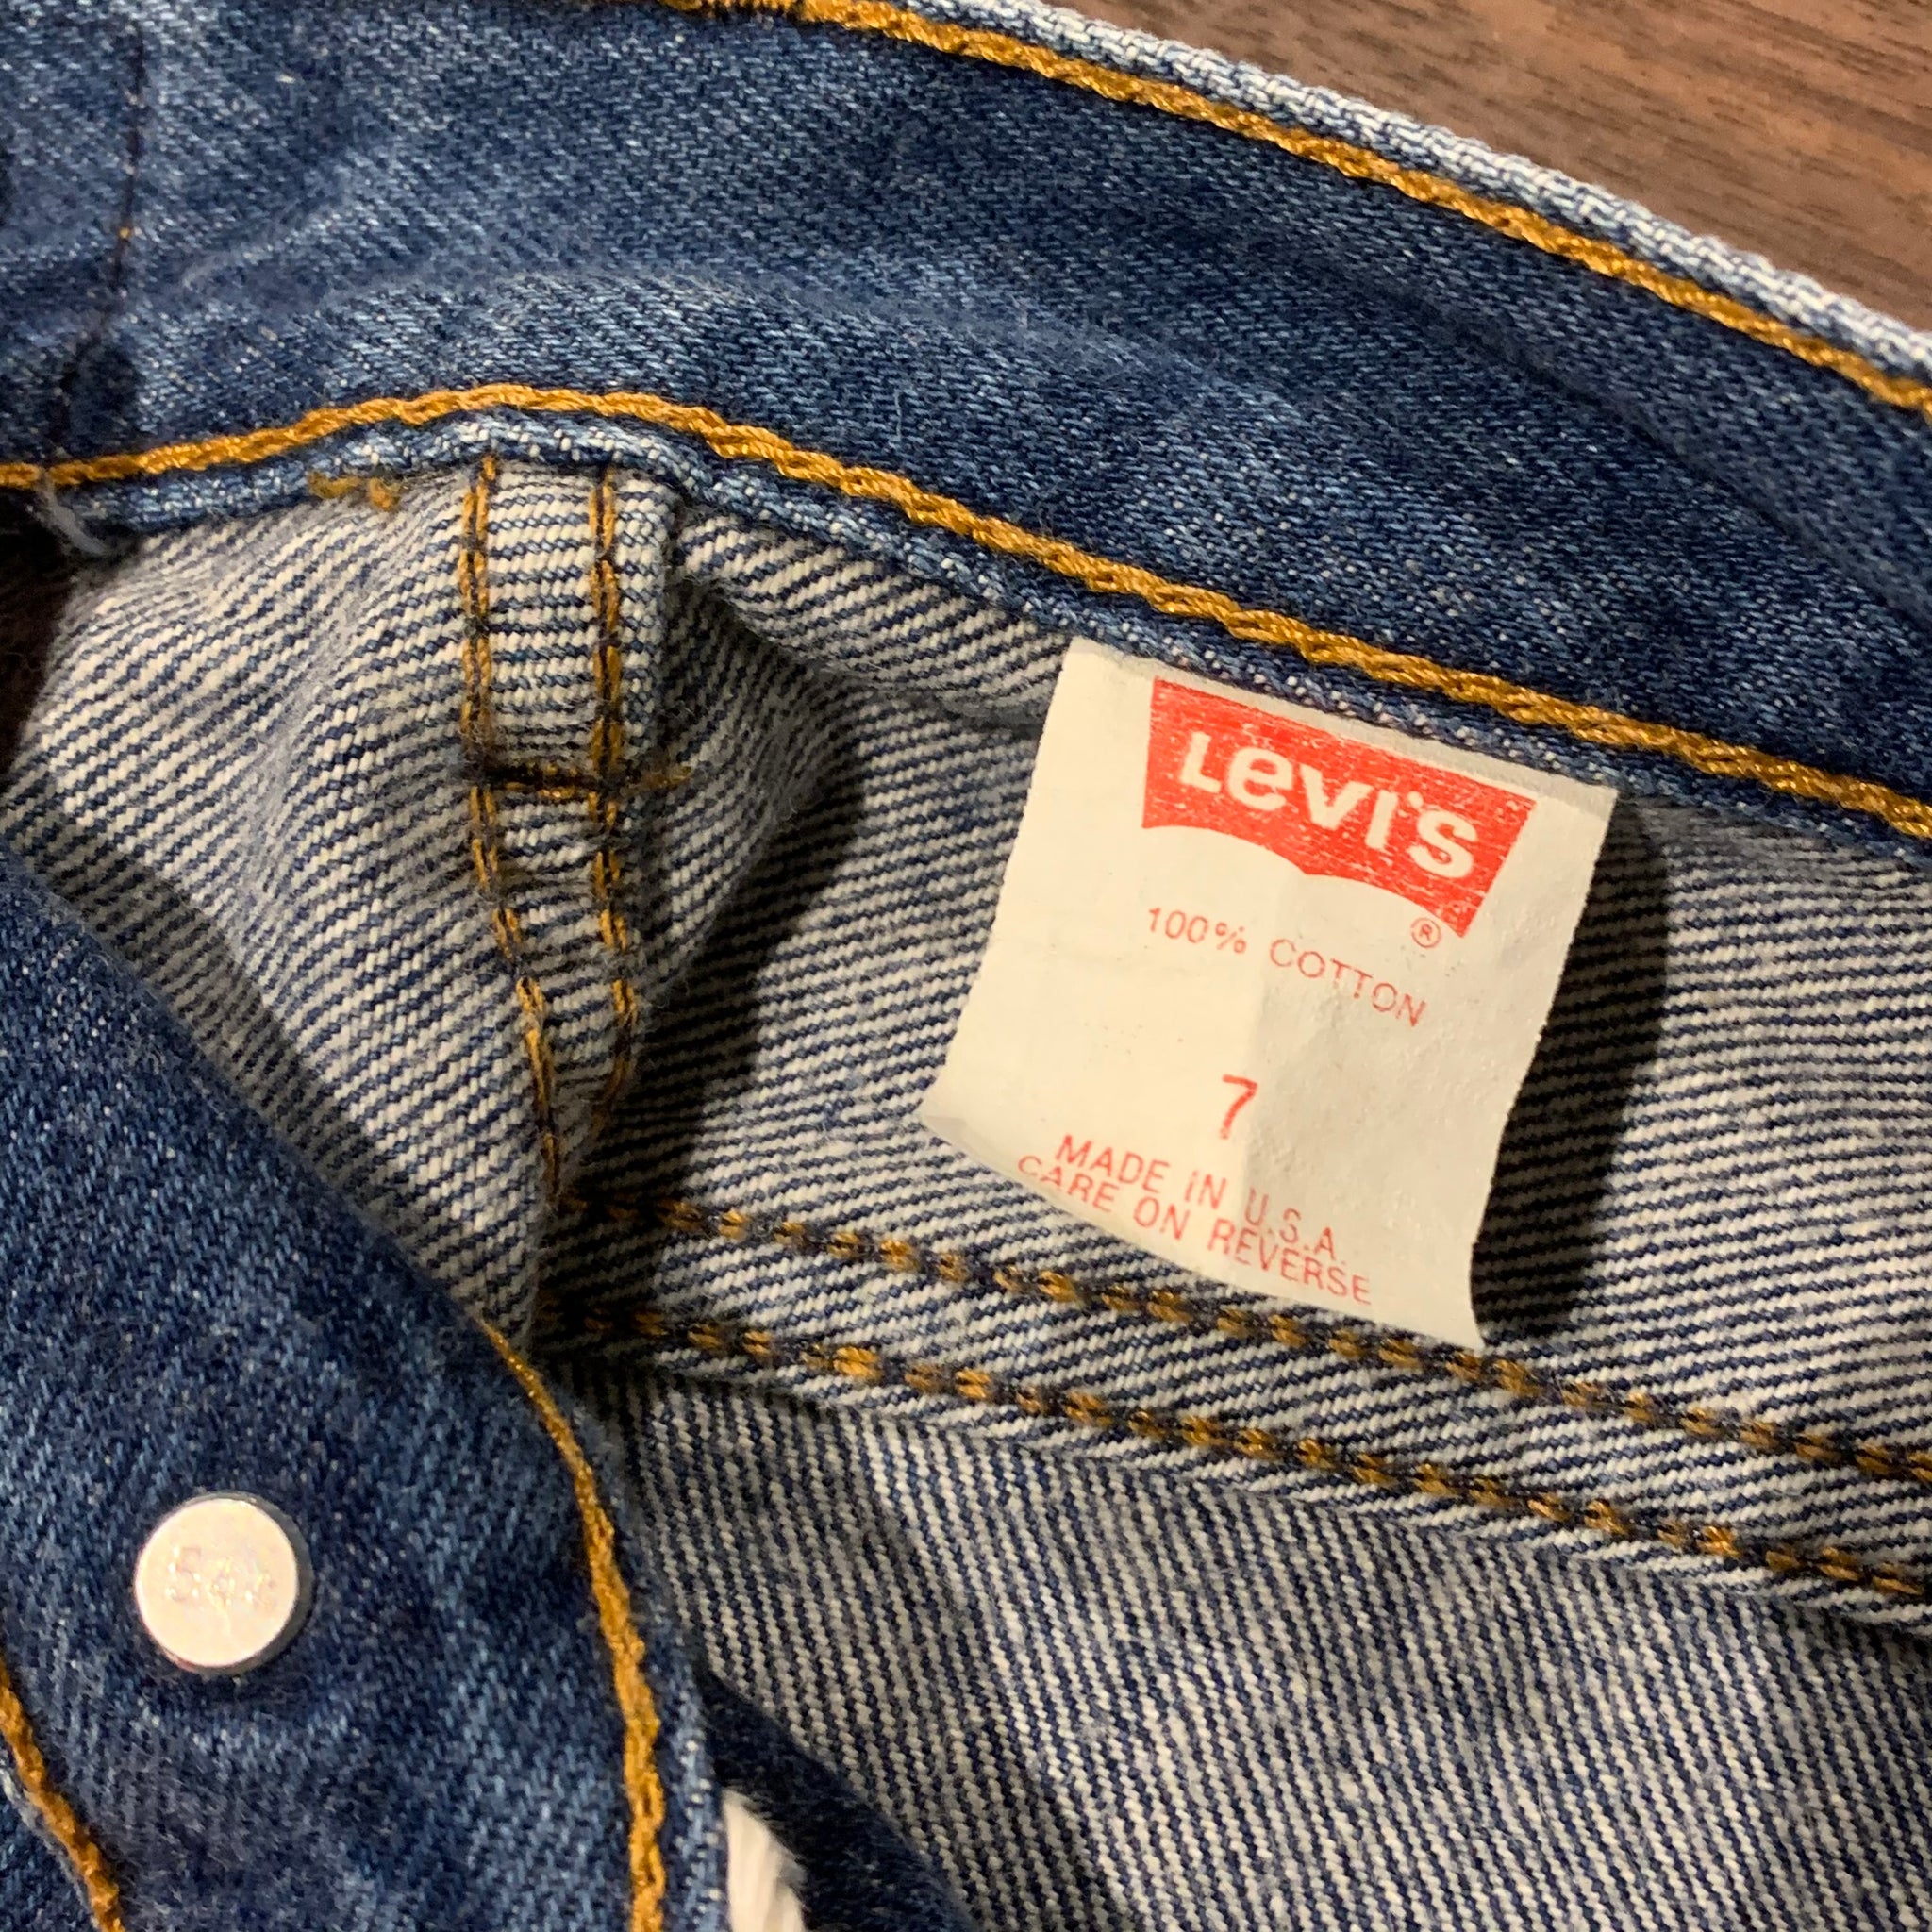 Levi's/17501-0158/MADE IN USA/size7 – ReSacca